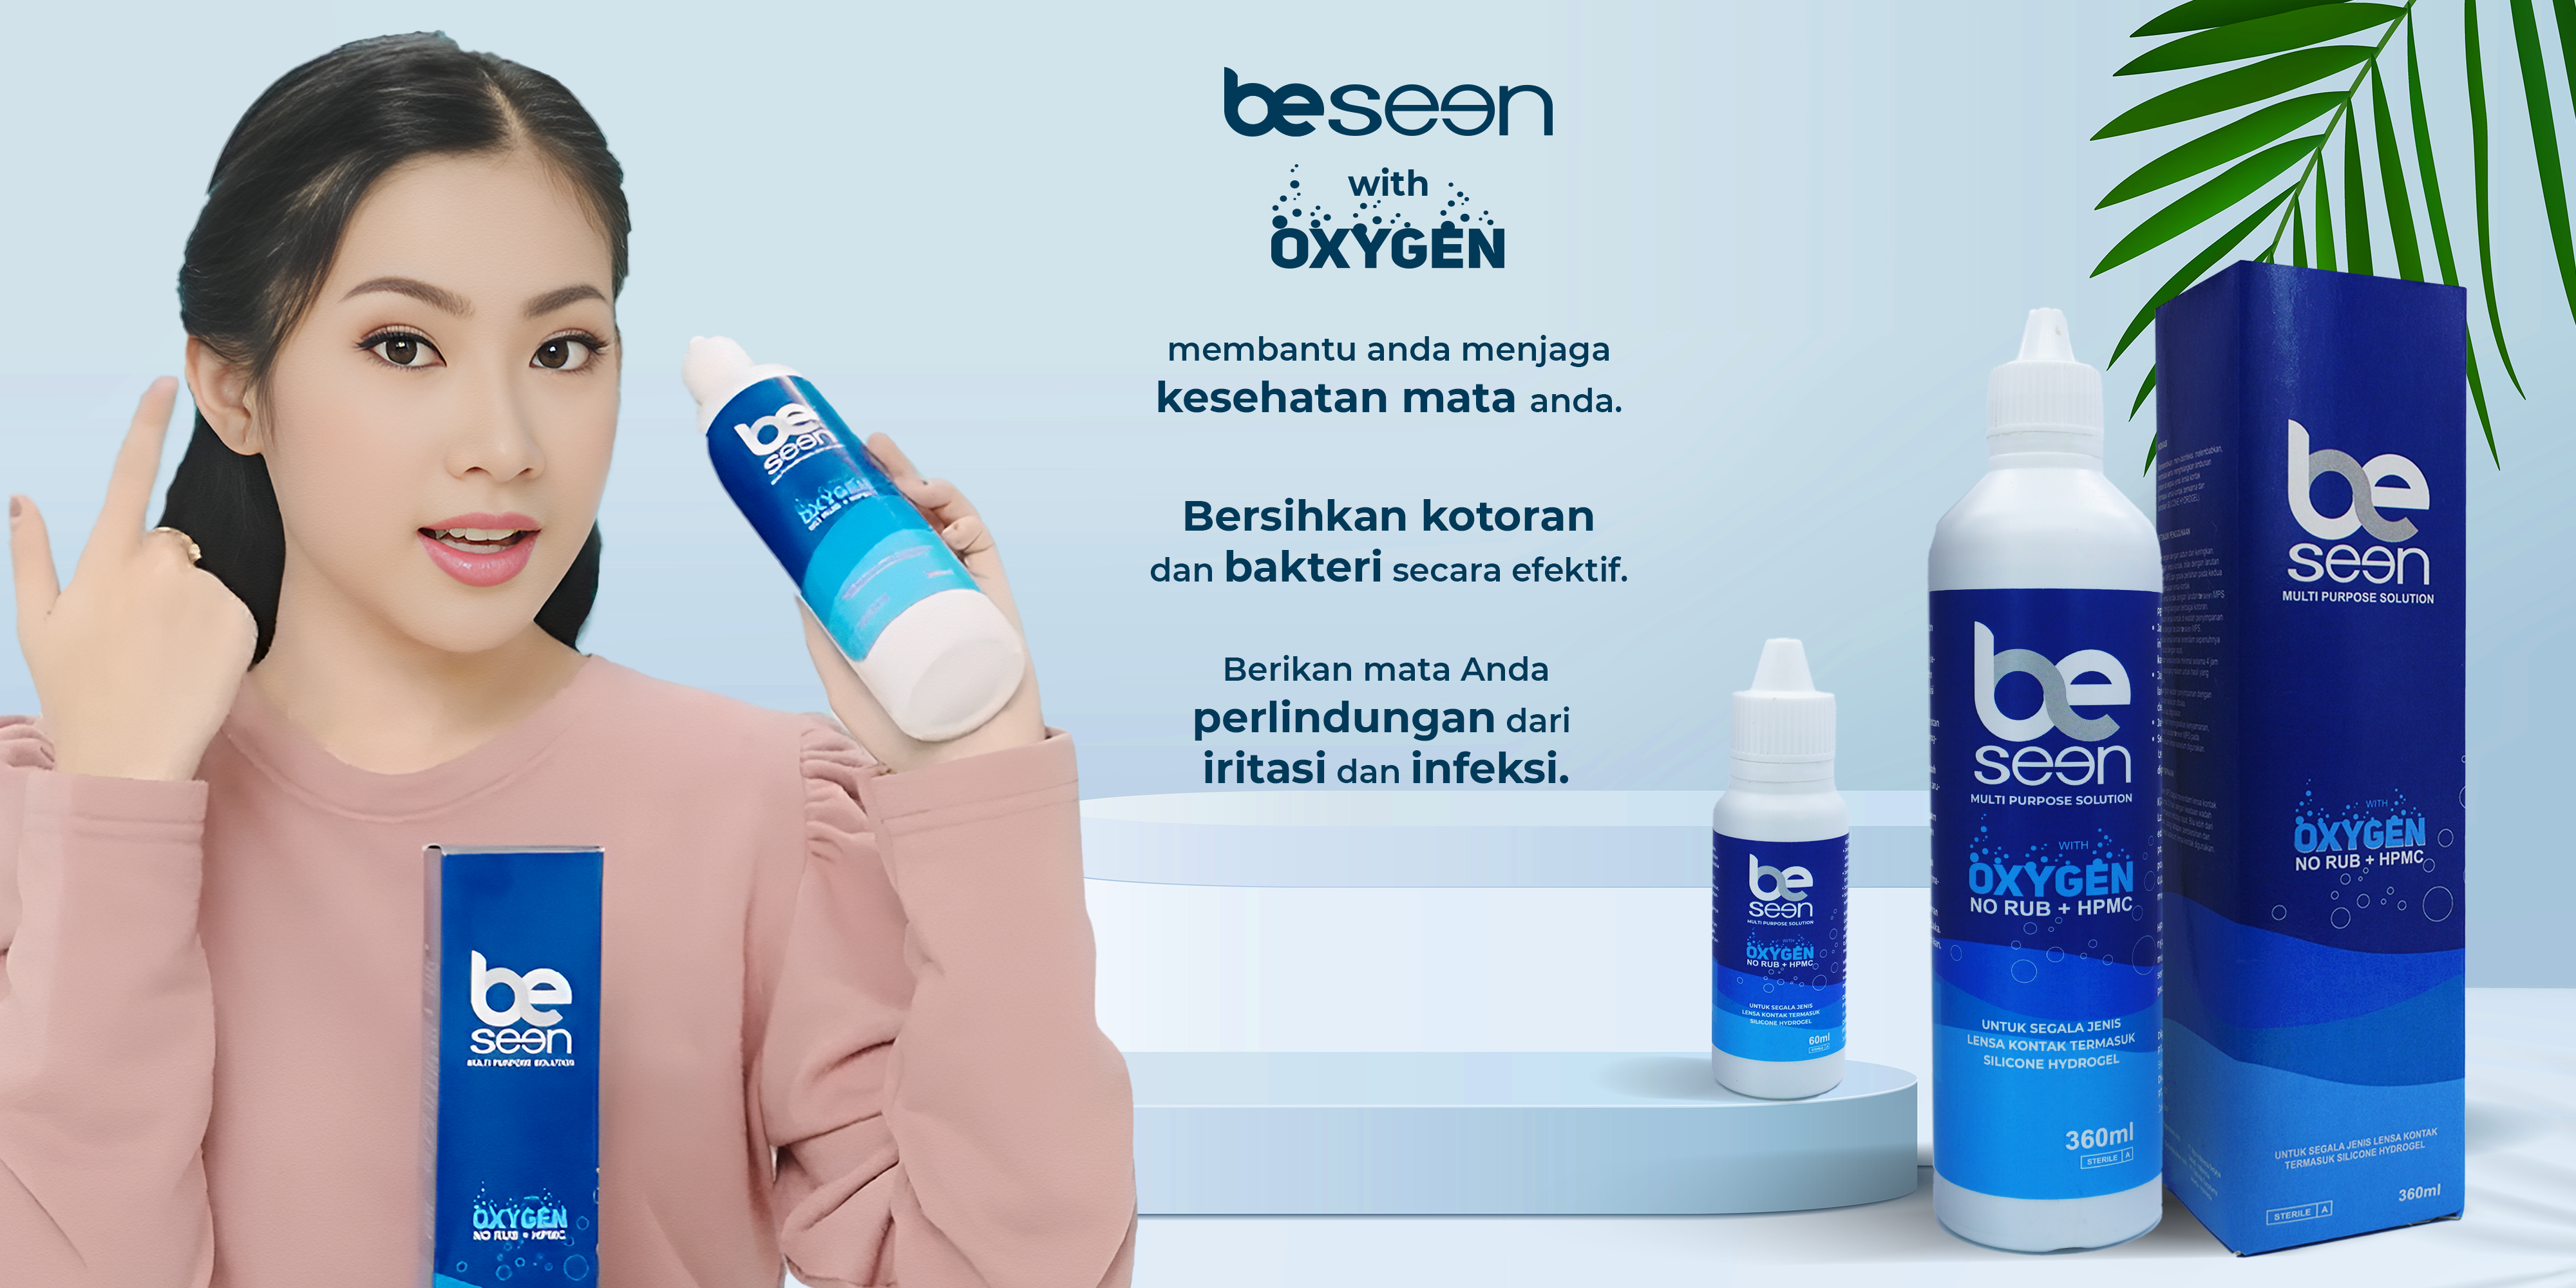 BESEEN with OXYGEN Multi-Purpose Solution